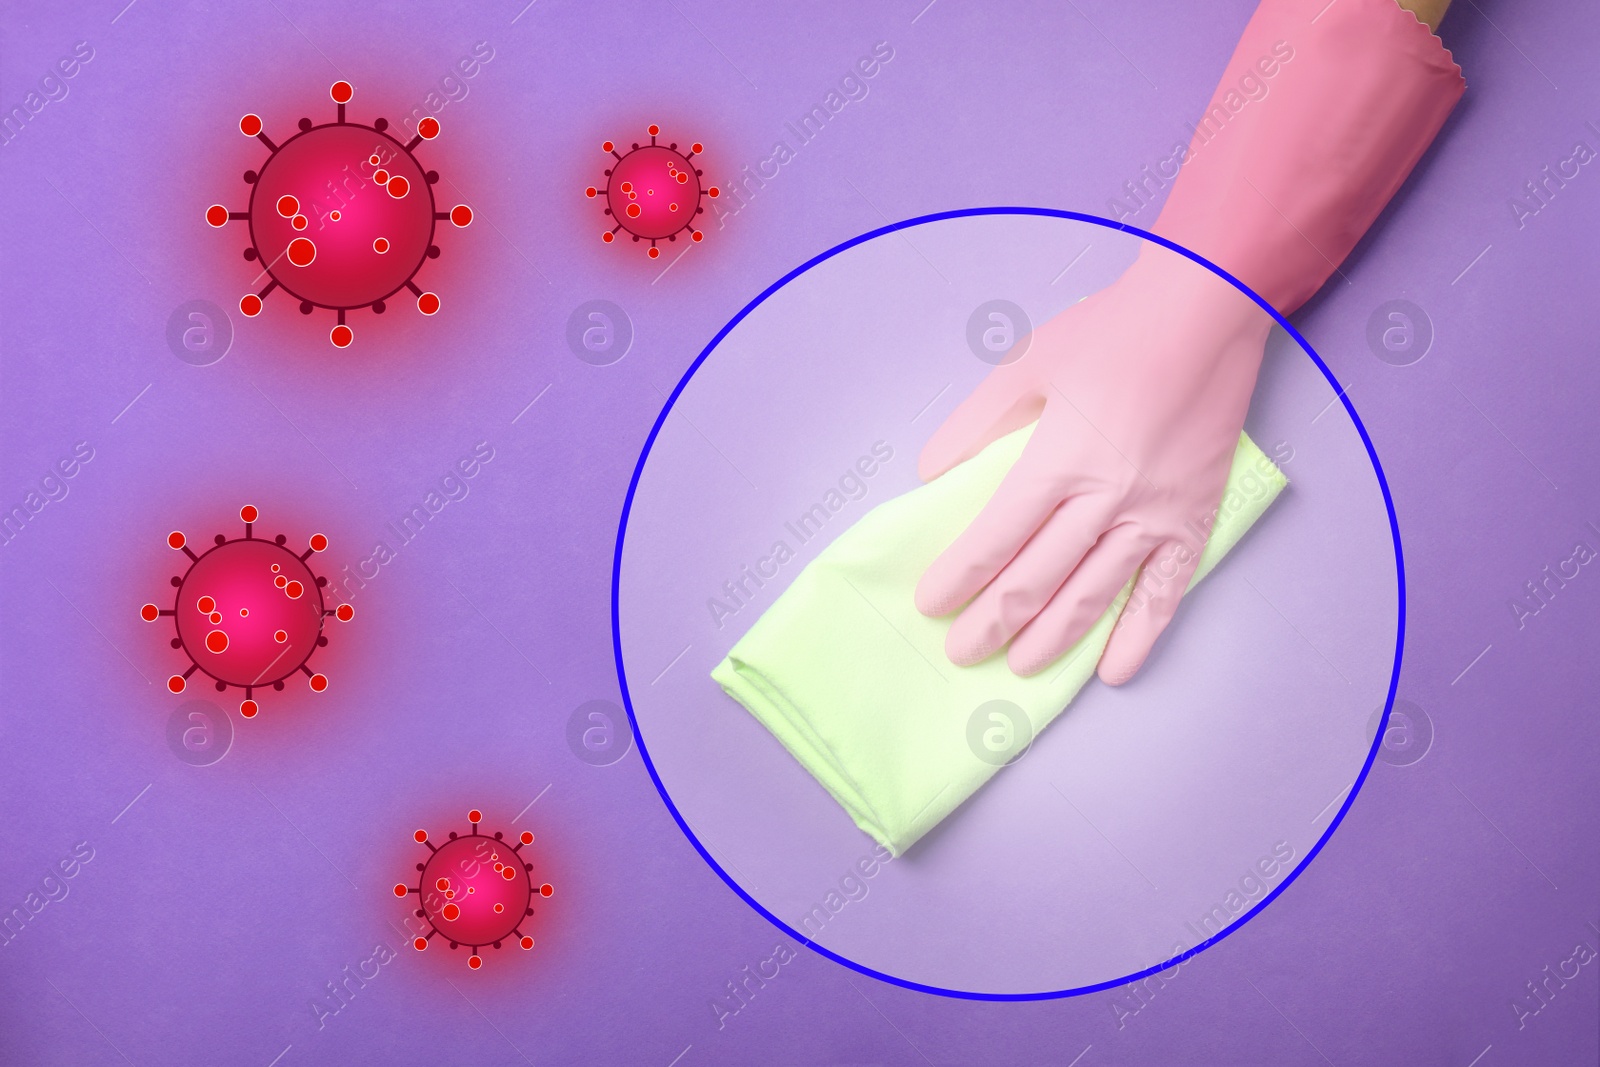 Image of Cleaning vs viruses. Woman washing surface with rag and disinfecting solution